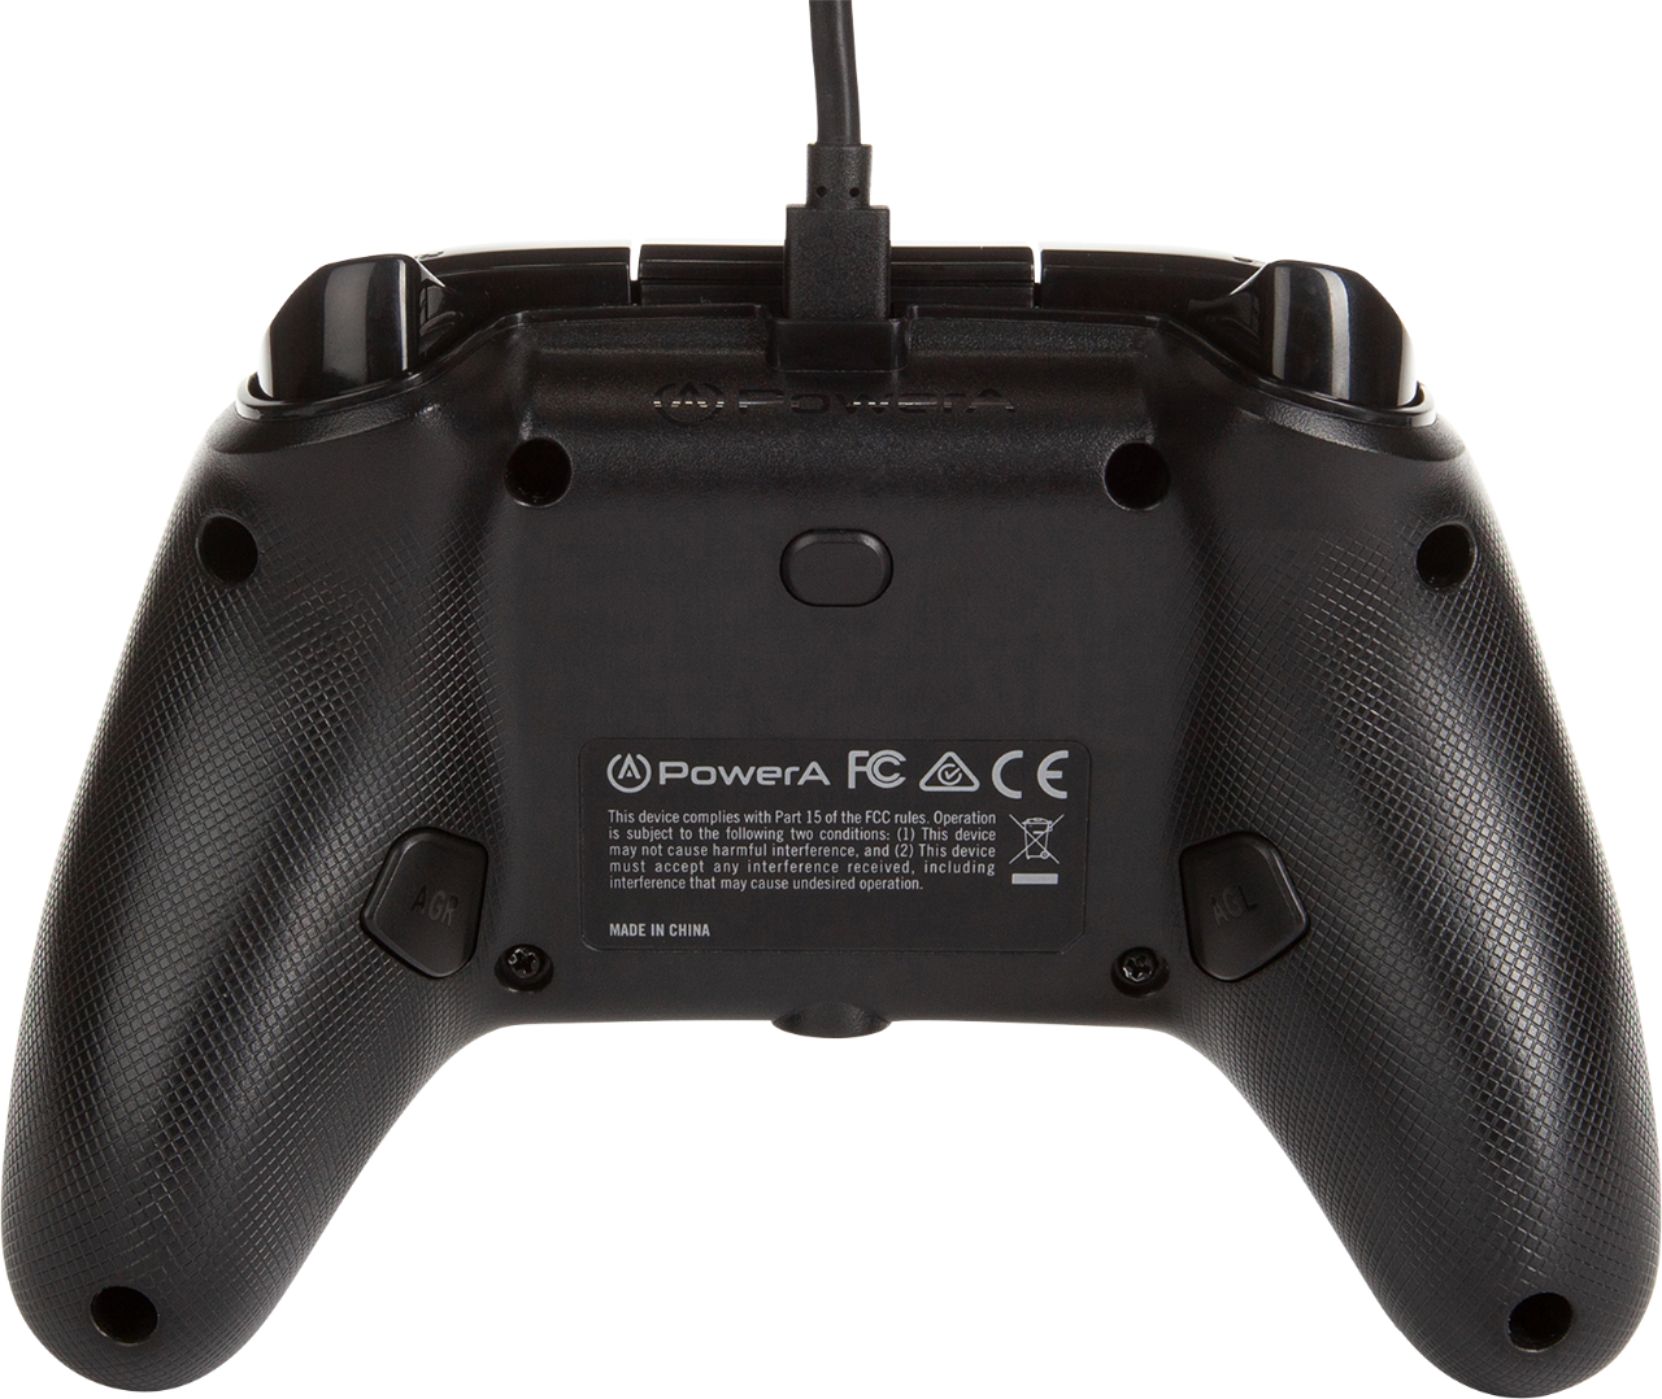 Back View: Hori - Tactical Assault Commander (TAC) Video Game Mechanical Keypad Controller for PlayStation 5, PlayStation 4, and PC - Black